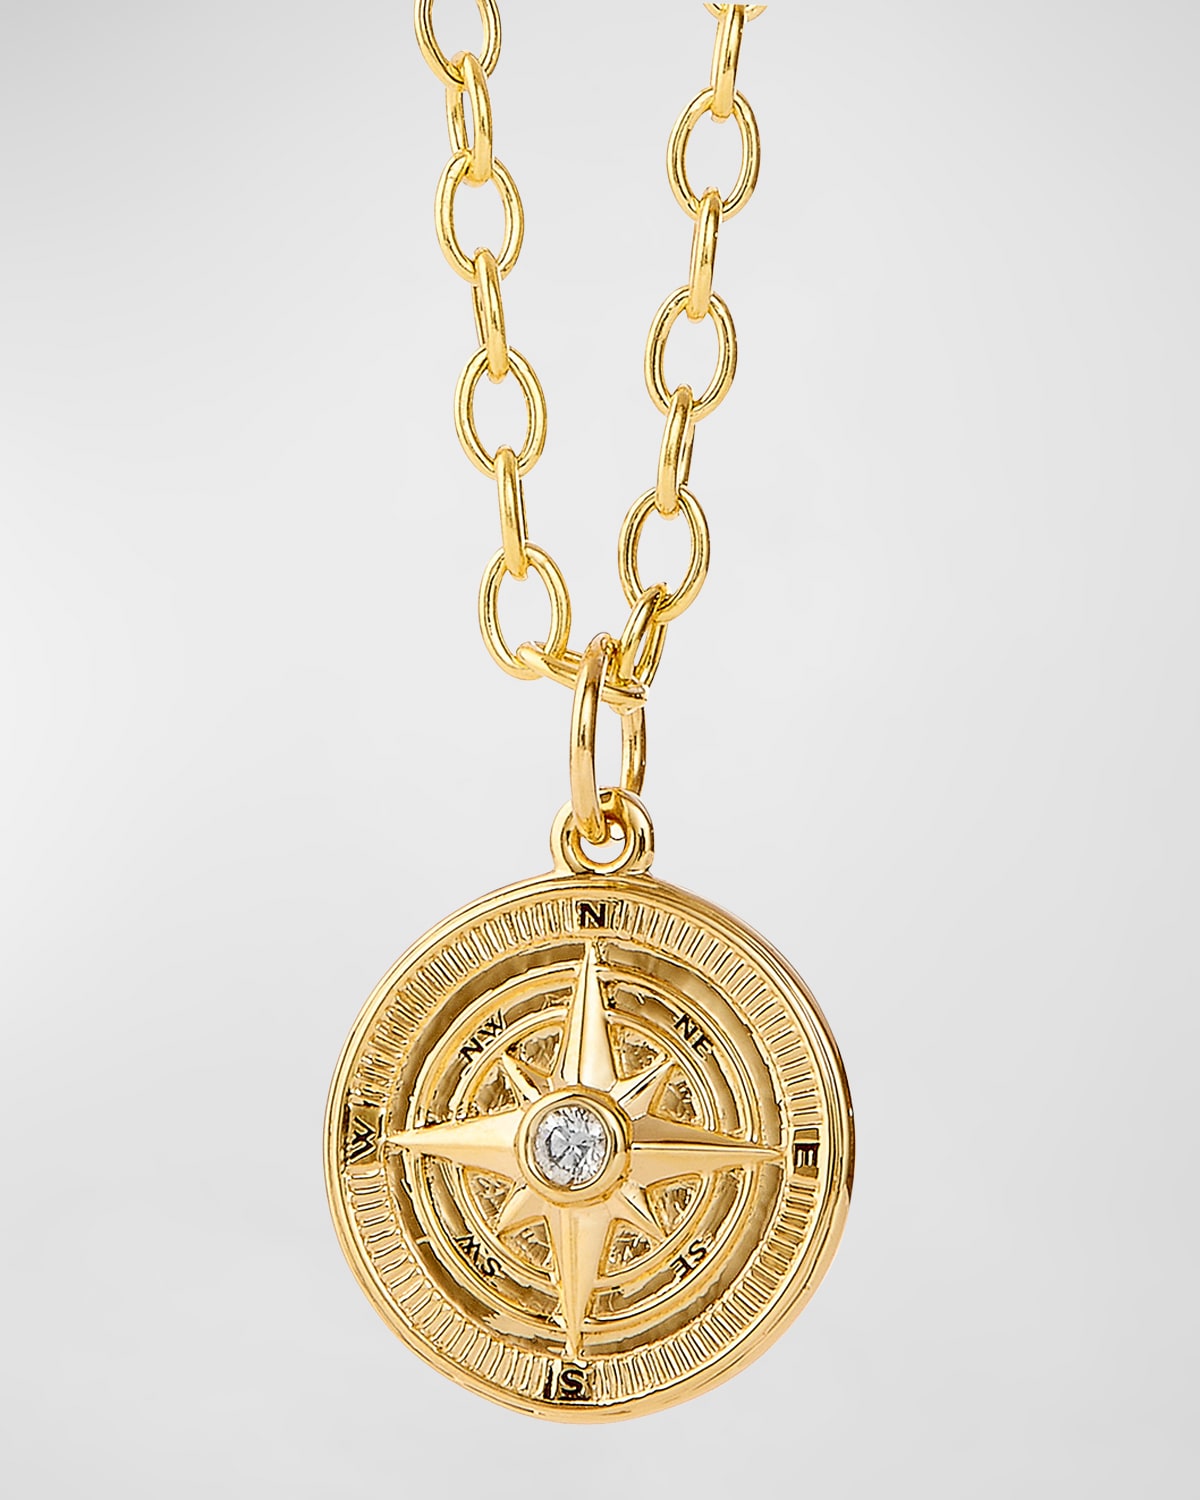 SYNA 18K YELLOW GOLD COSMIC MARITIME COMPASS PENDANT NECKLACE WITH DIAMOND BEZEL